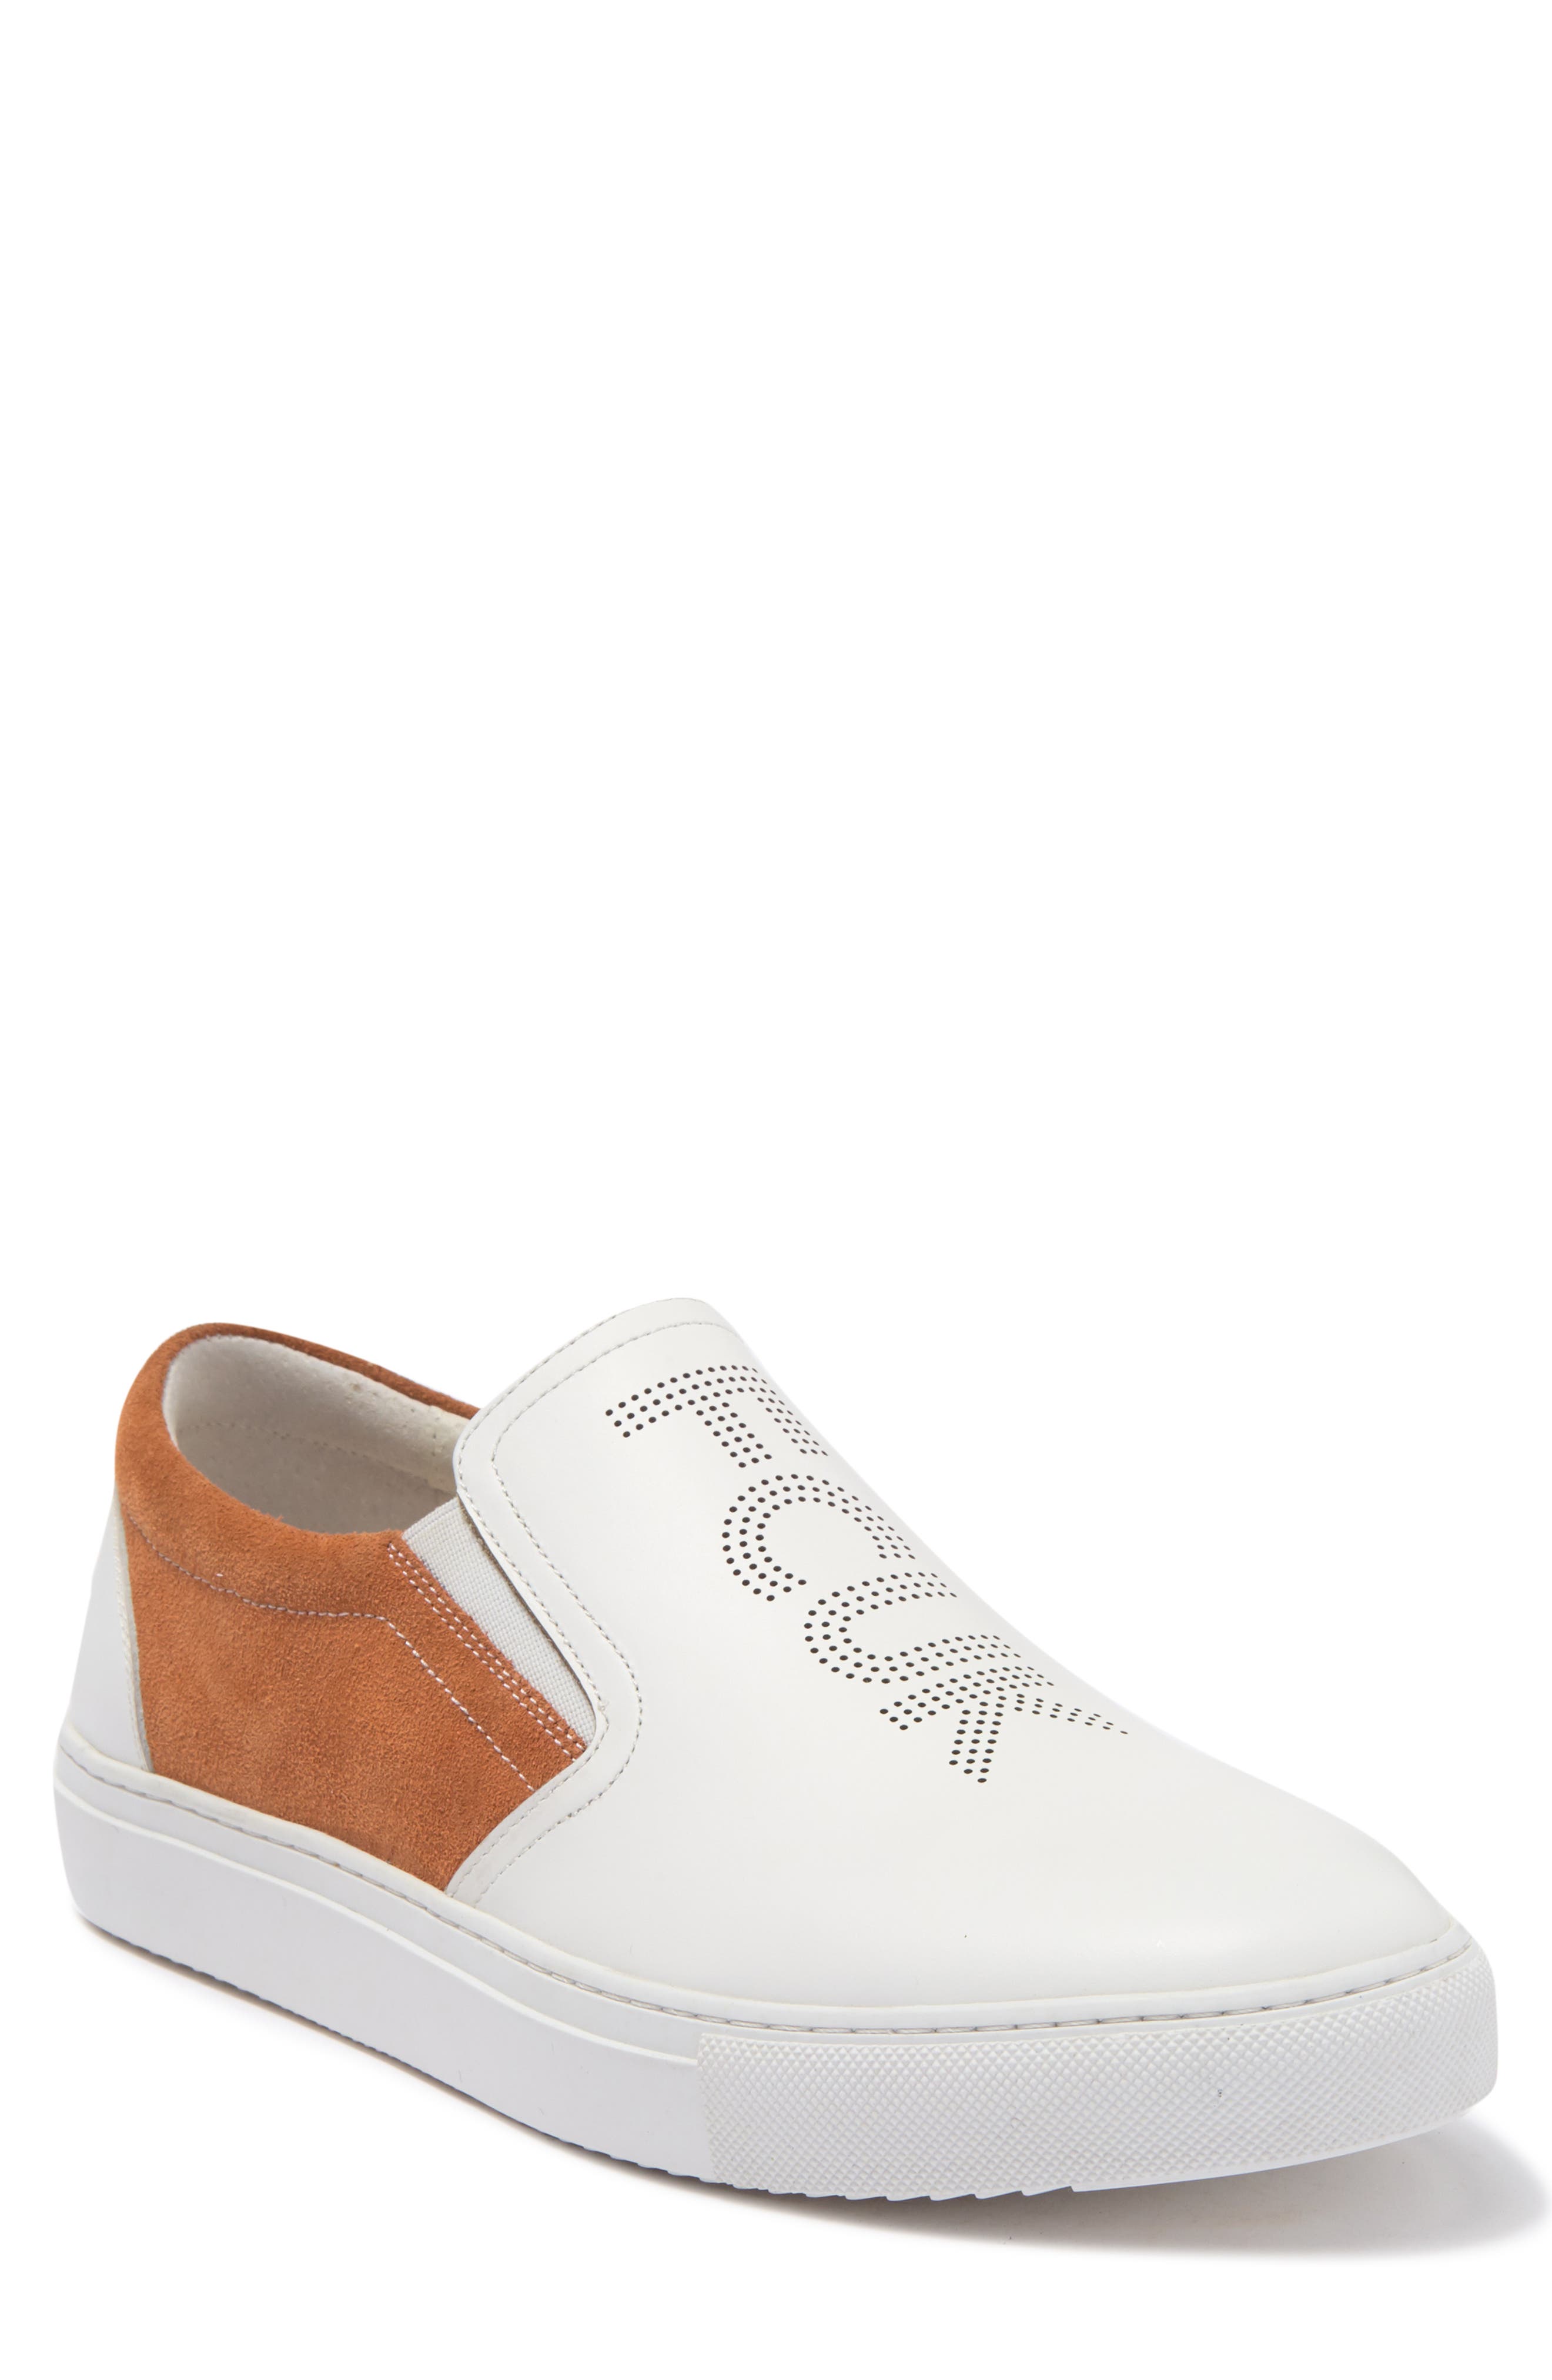 French Connection Marcel Leather Colorblock Slip-on Sneaker In White